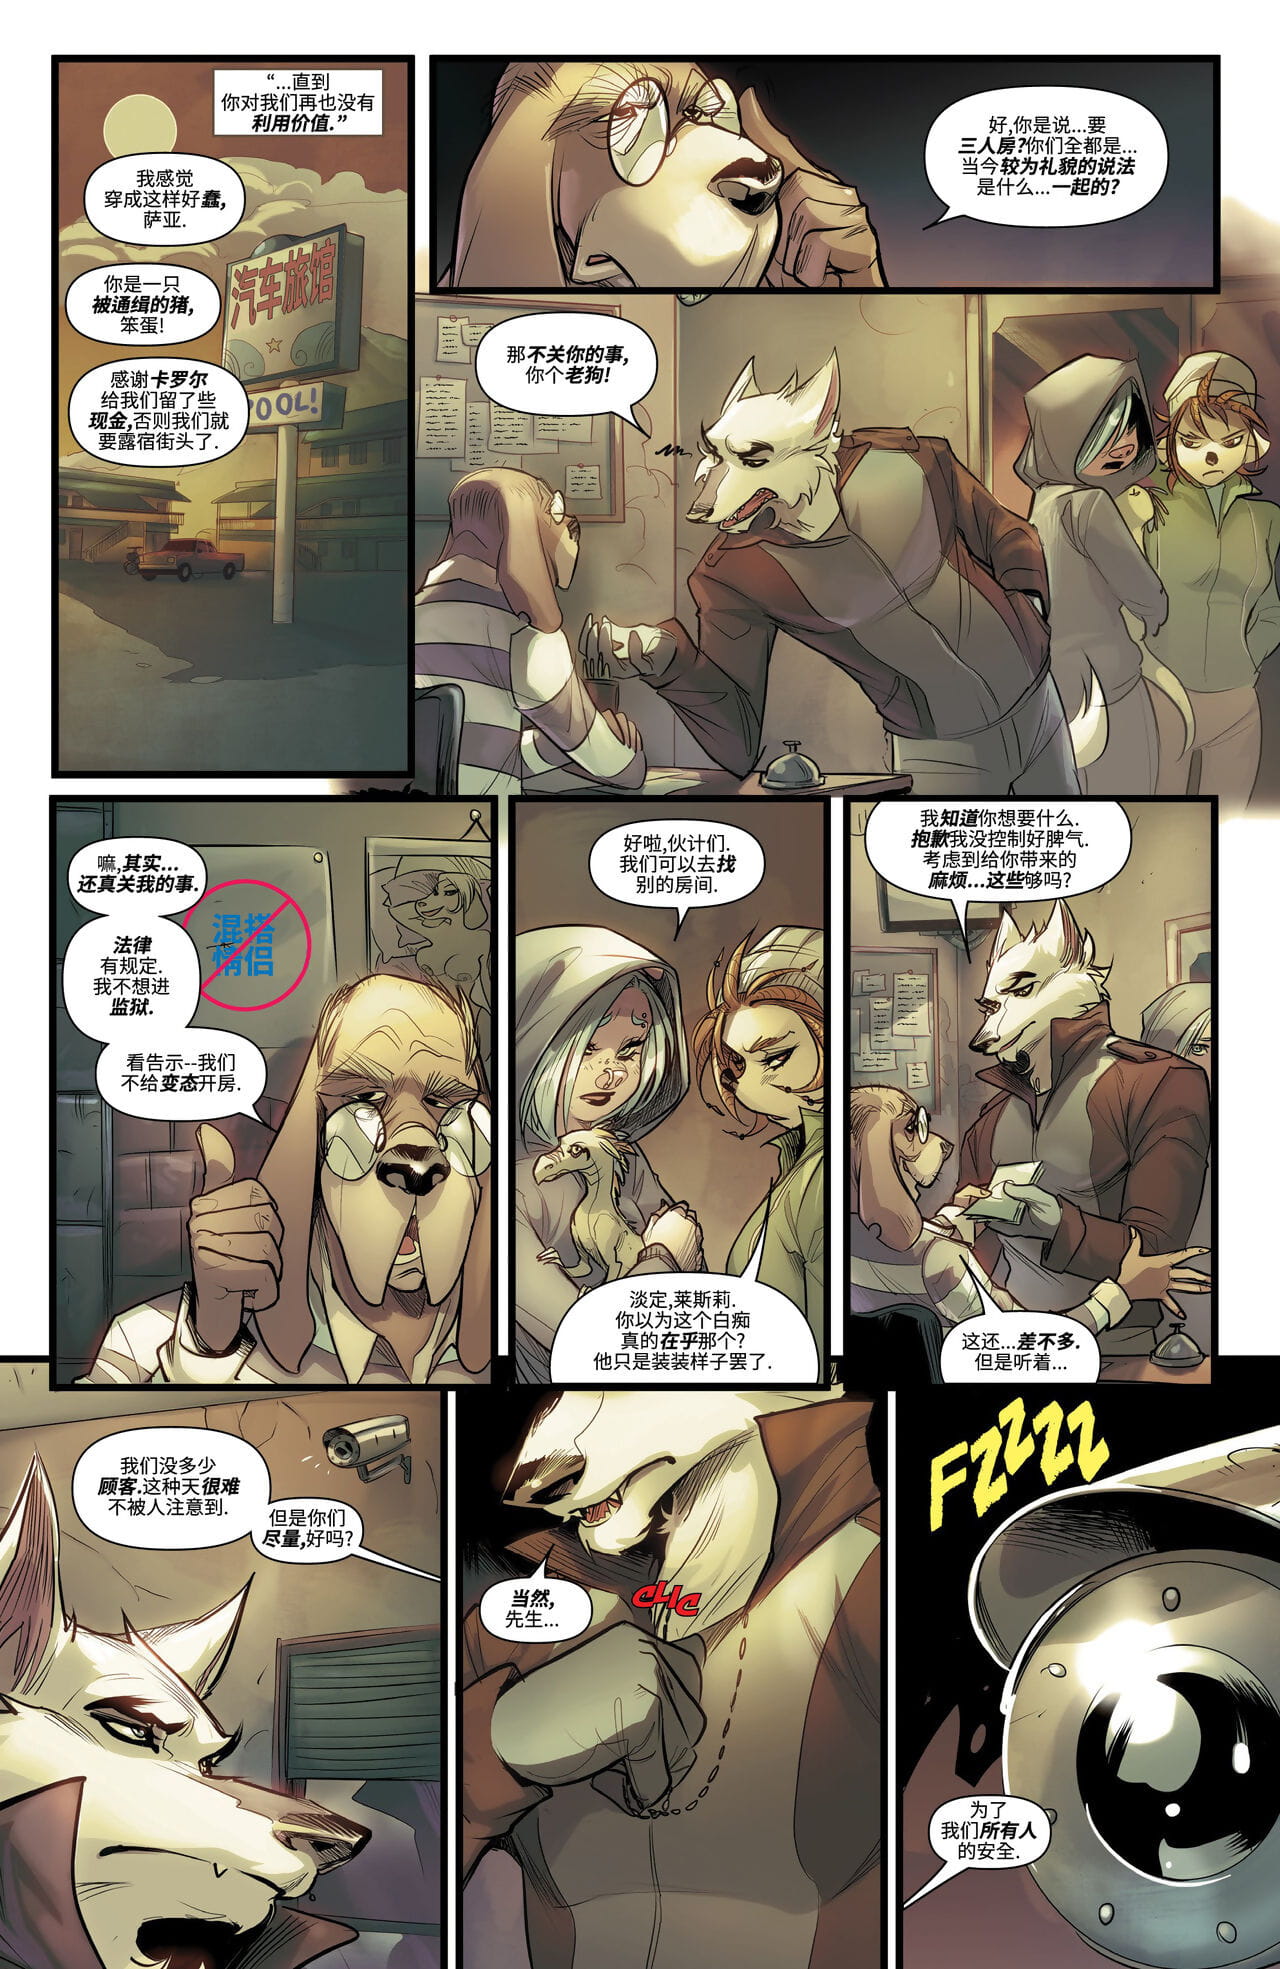 Unnatural - 反自然 - Issue 7 page 1